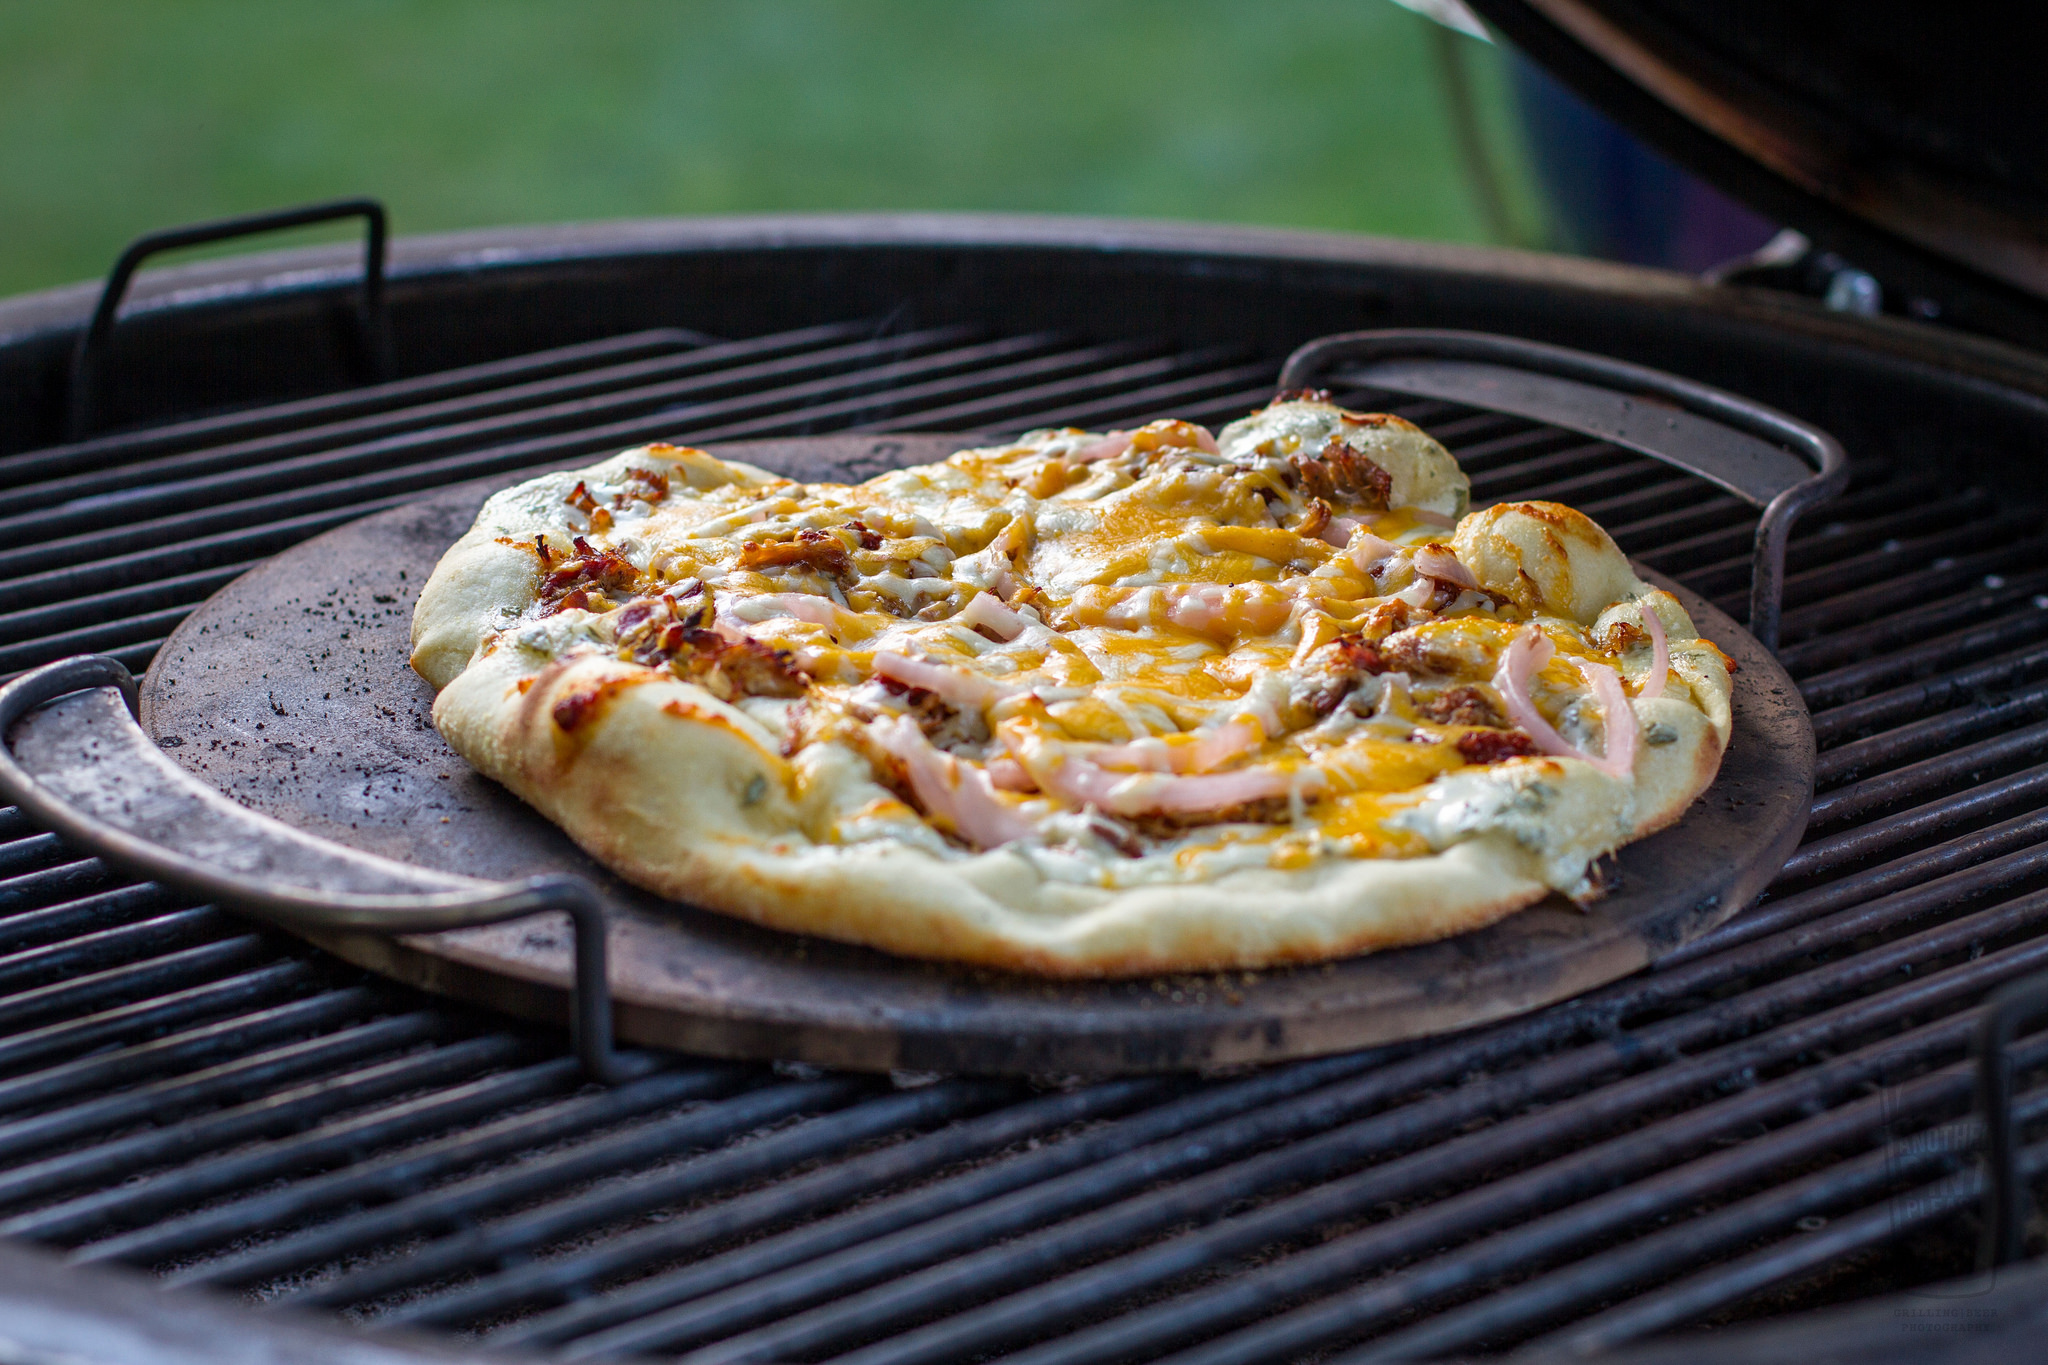 Grilled Pizza on the Summit Charcoal Grill, Grilling Inspiration